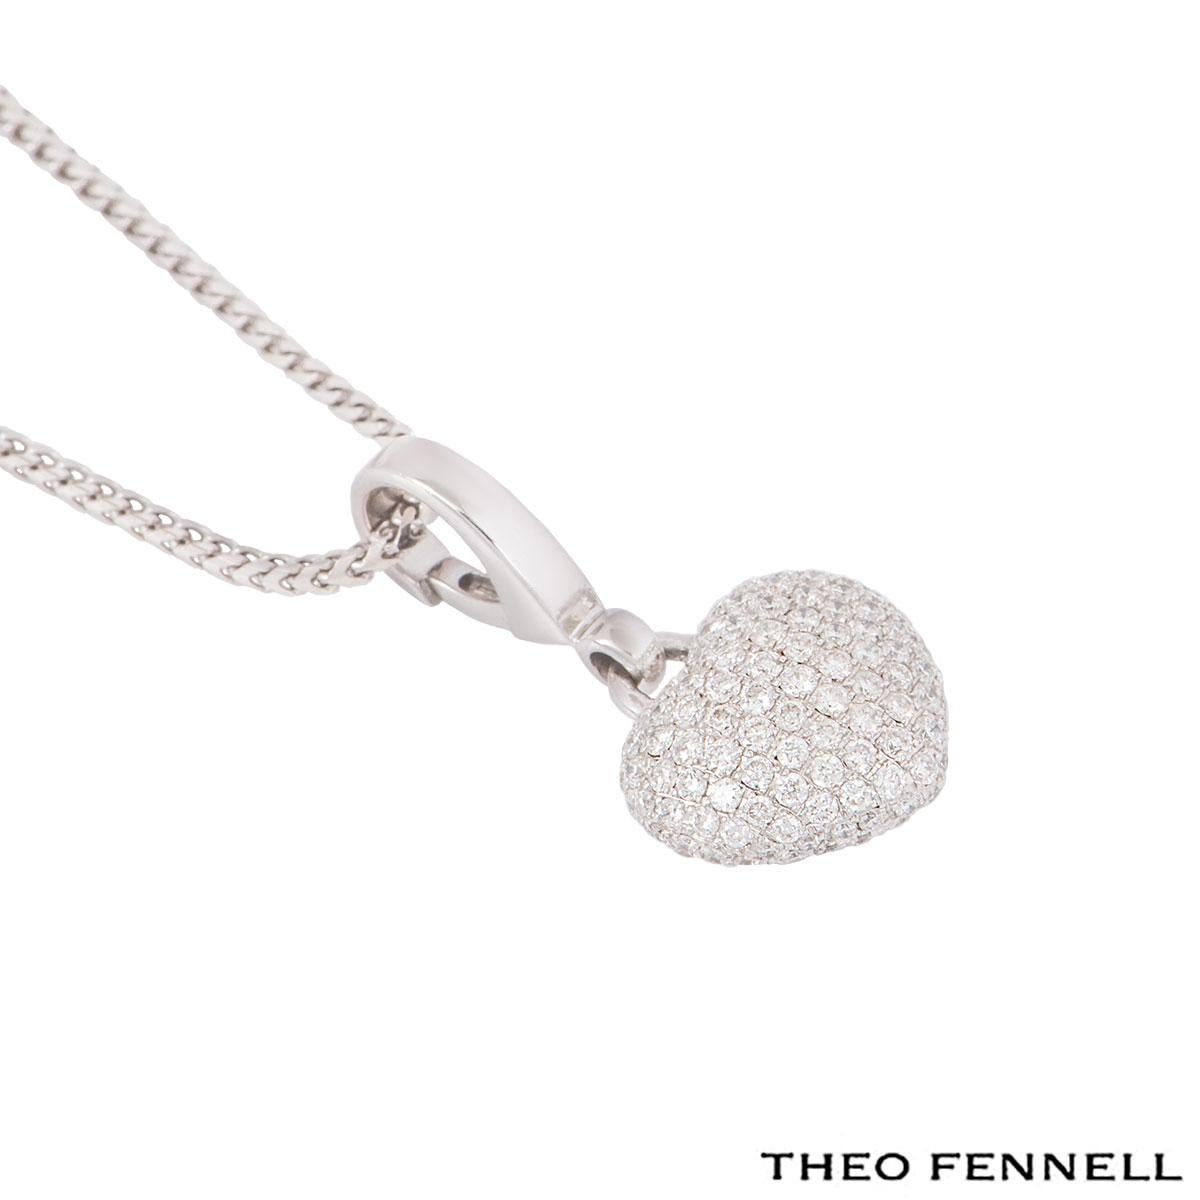 An 18k white gold Theo Fennell heart pendant. The pendant features a love heart centre piece set with round brilliant cut diamonds in a pave setting with a total weight of approximately 1.13ct. The pendant features a 15.60 inch Theo Fennell spiga